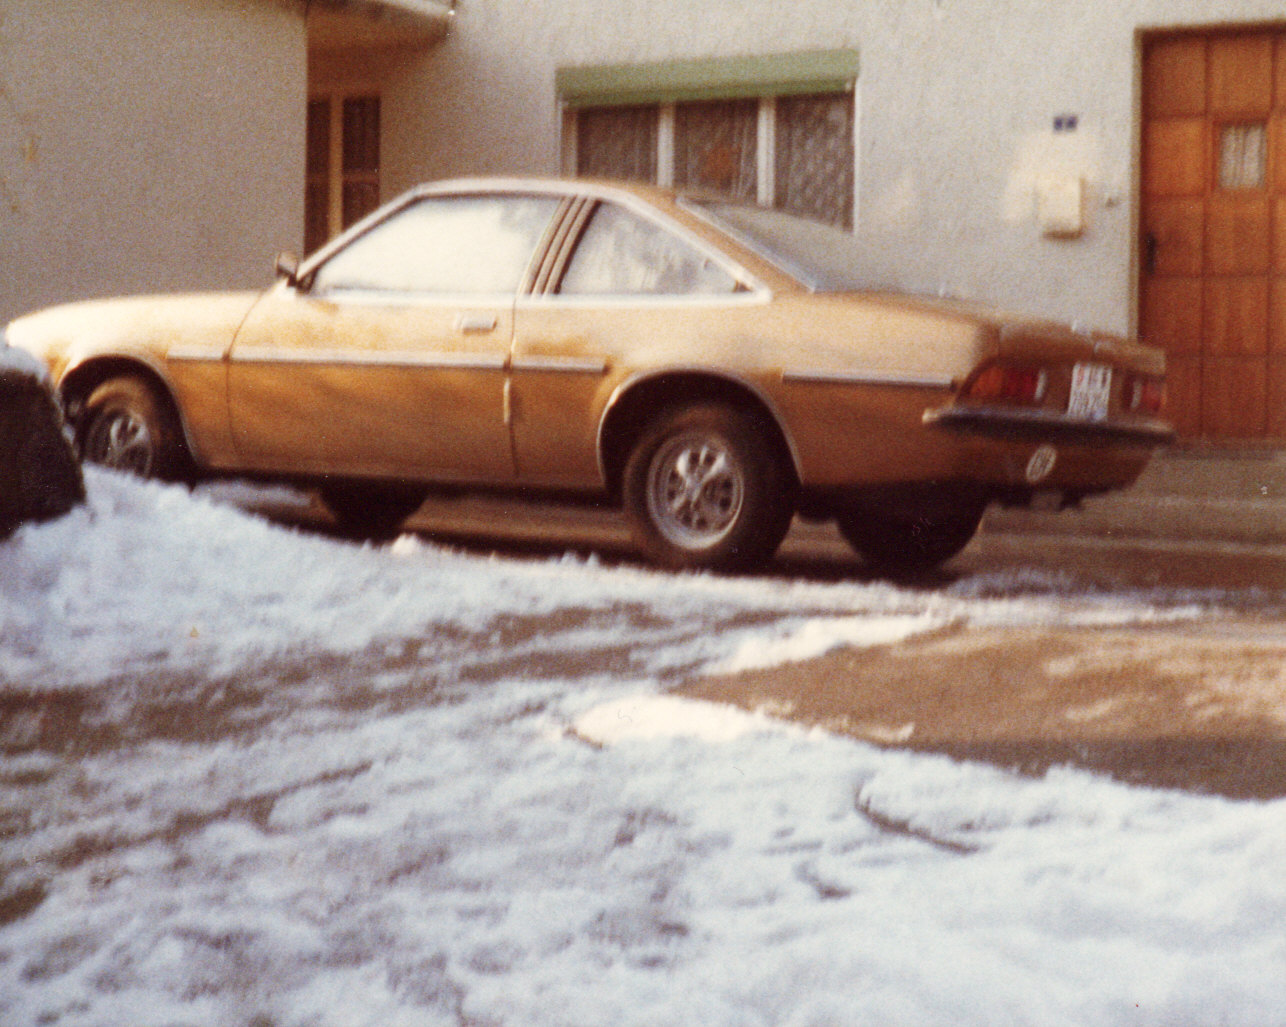 My first car was a Opel Manta, I had it from 1981 to 1983.